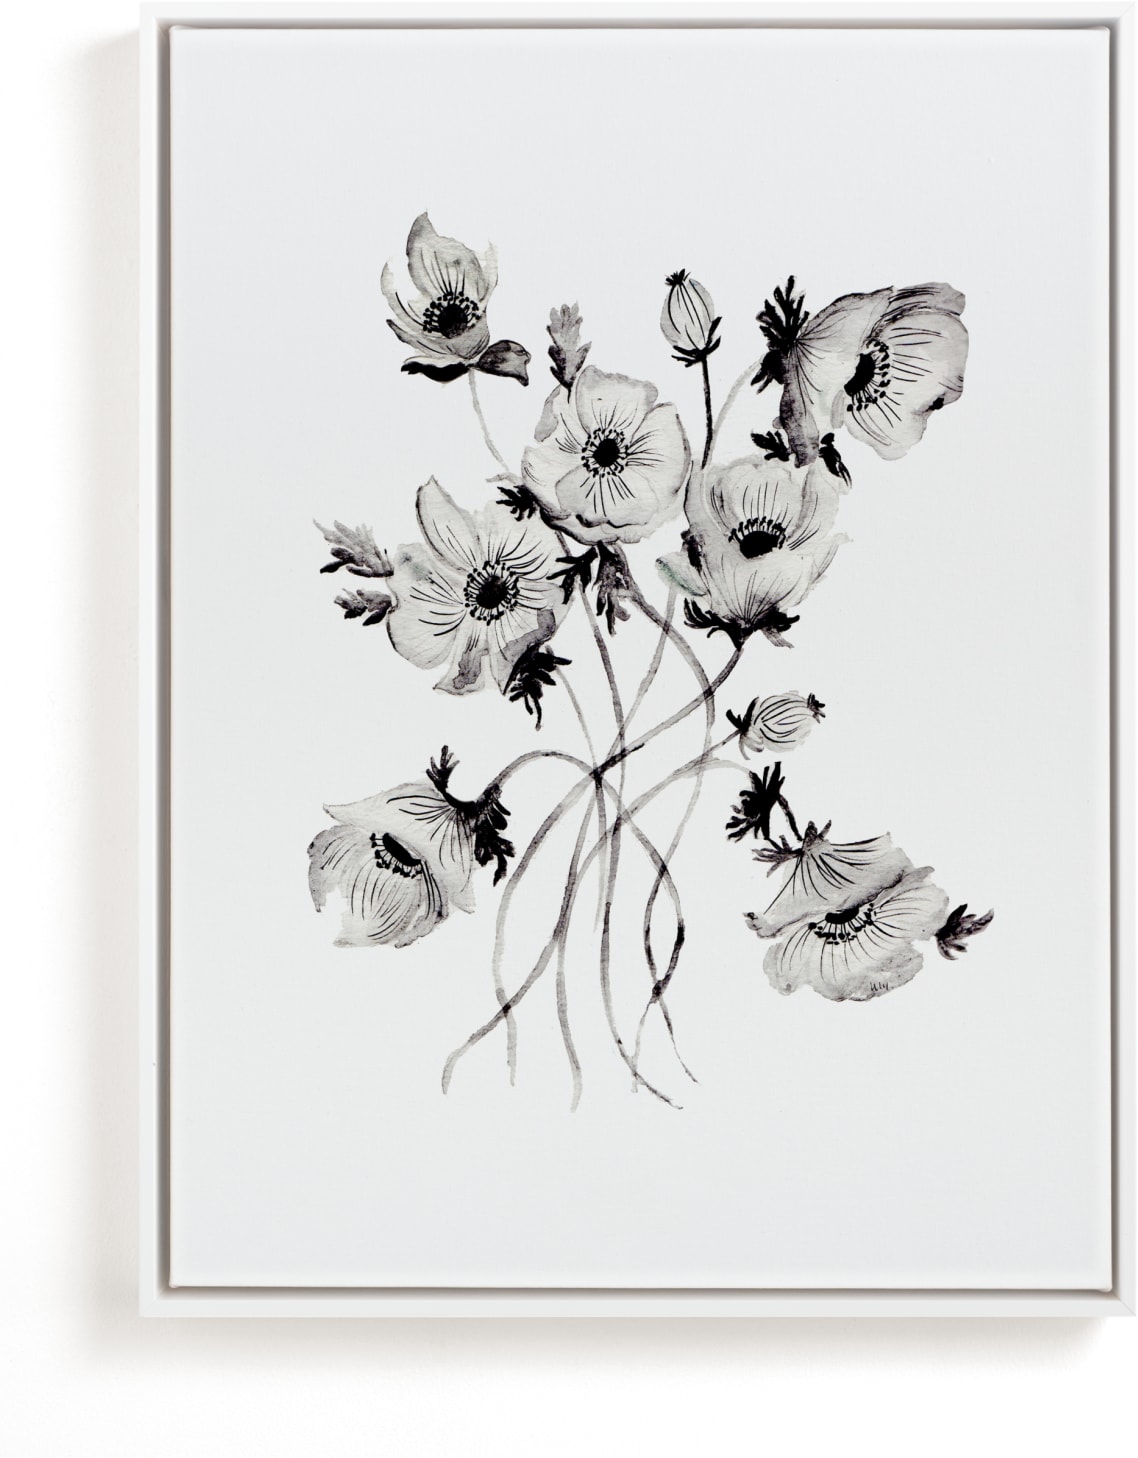 This is a black and white art by Shannon Kirsten called Greyscale Poppies.